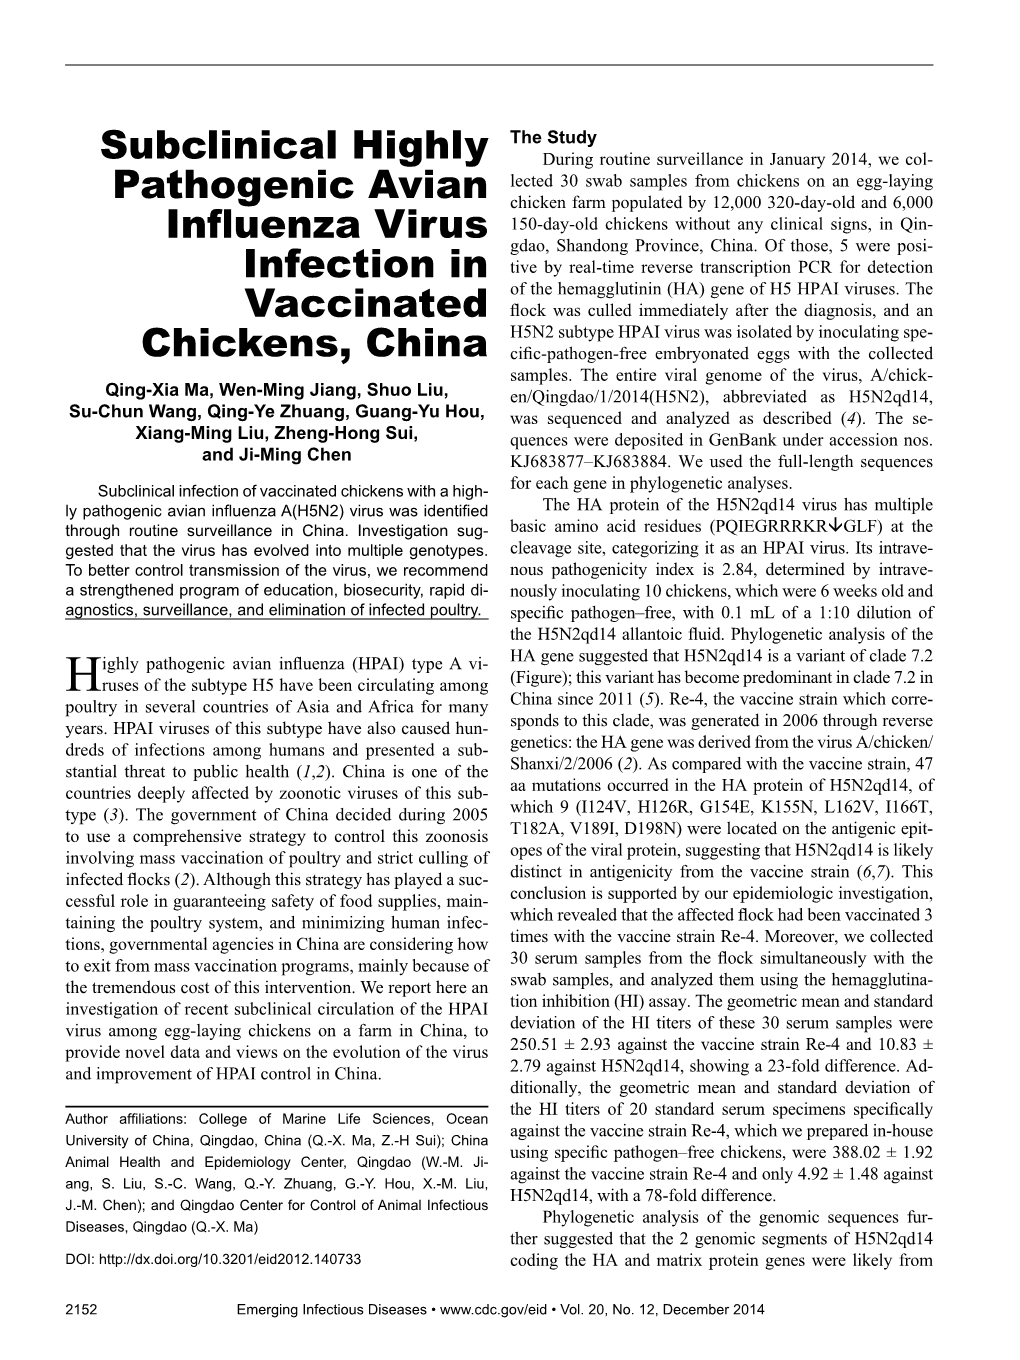 Subclinical Highly Pathogenic Avian Influenza Virus Infection In